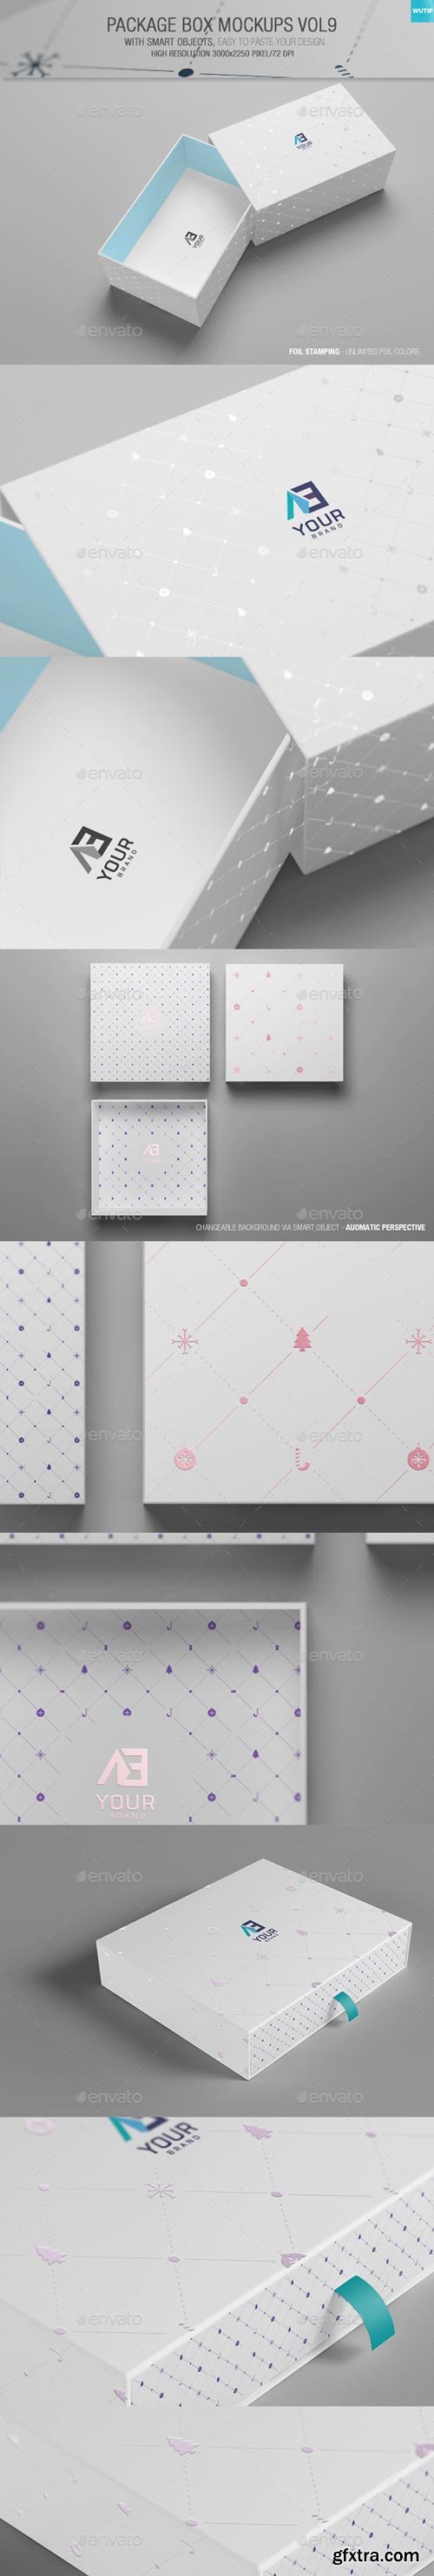 GraphicRiver - Package Box Mockups Vol9 13547117